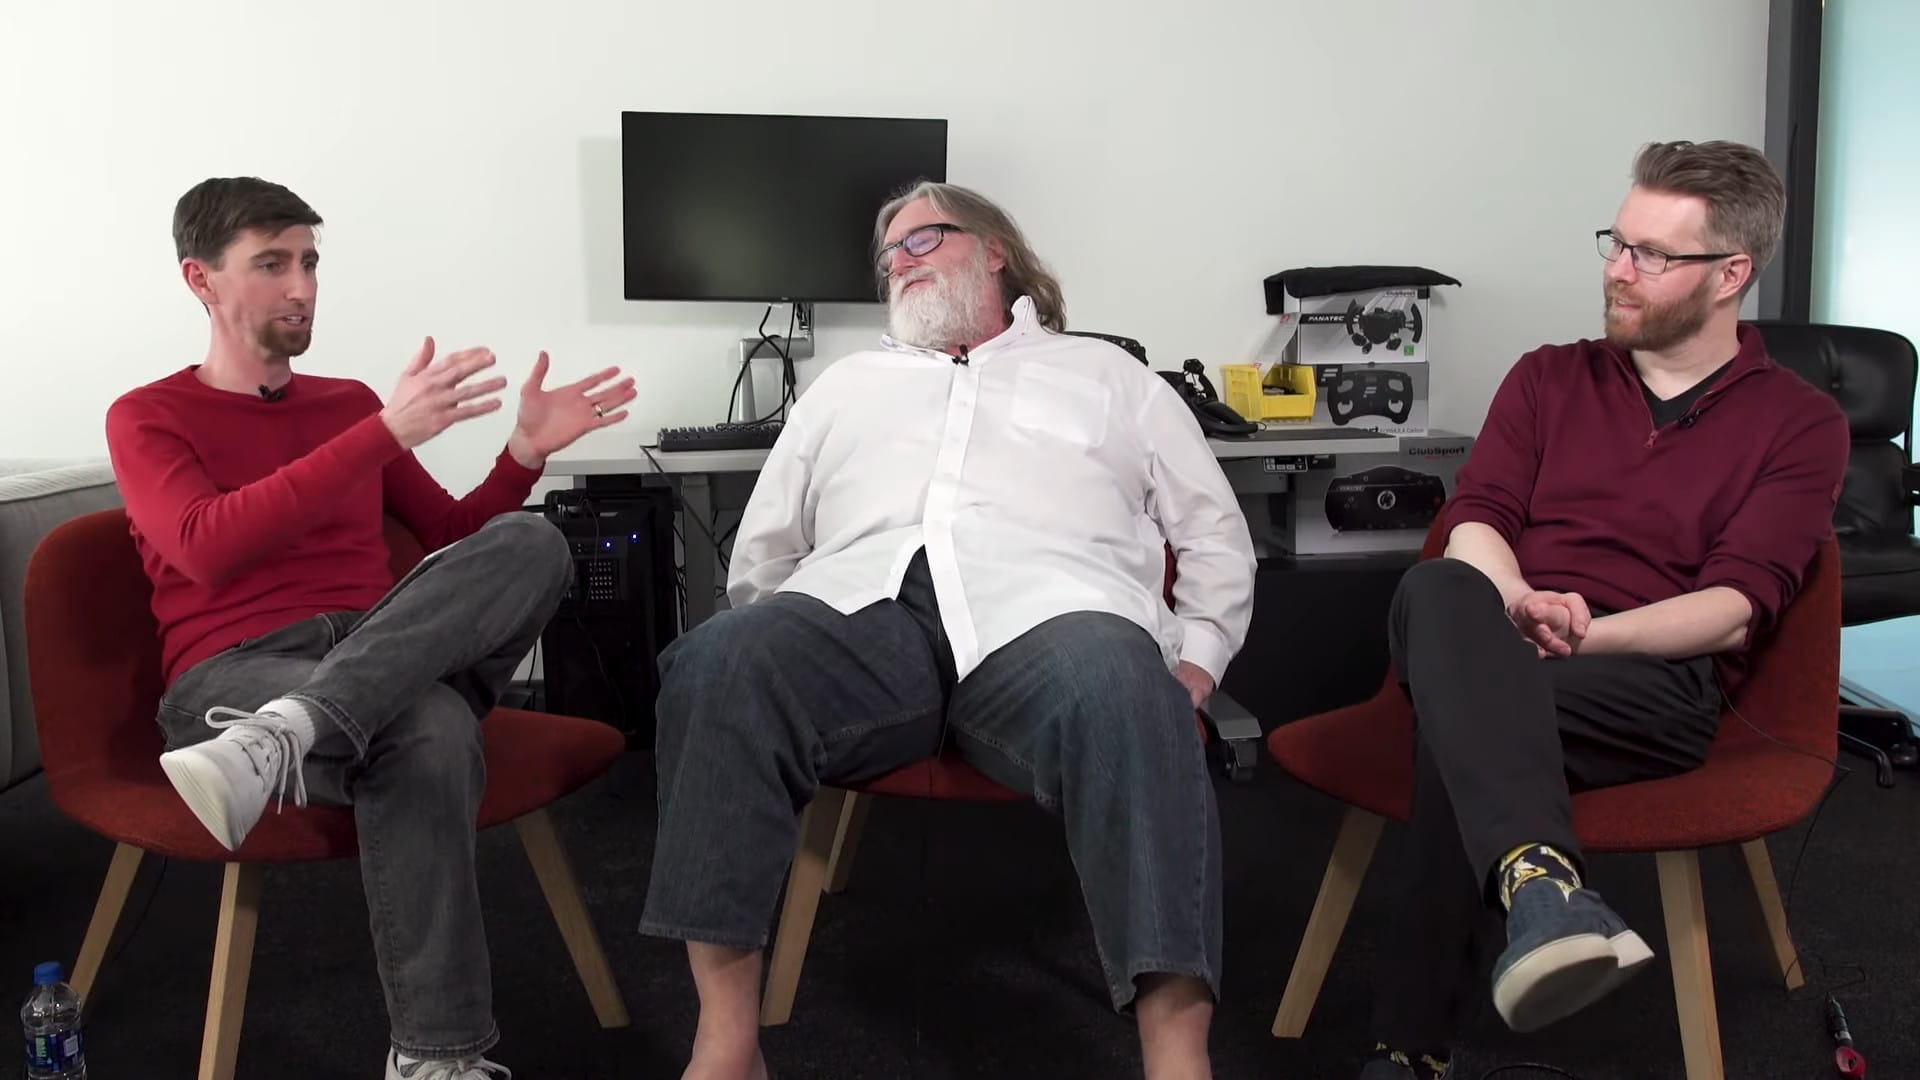 Gabe Newell has big plans for brain-computer interfaces in gaming